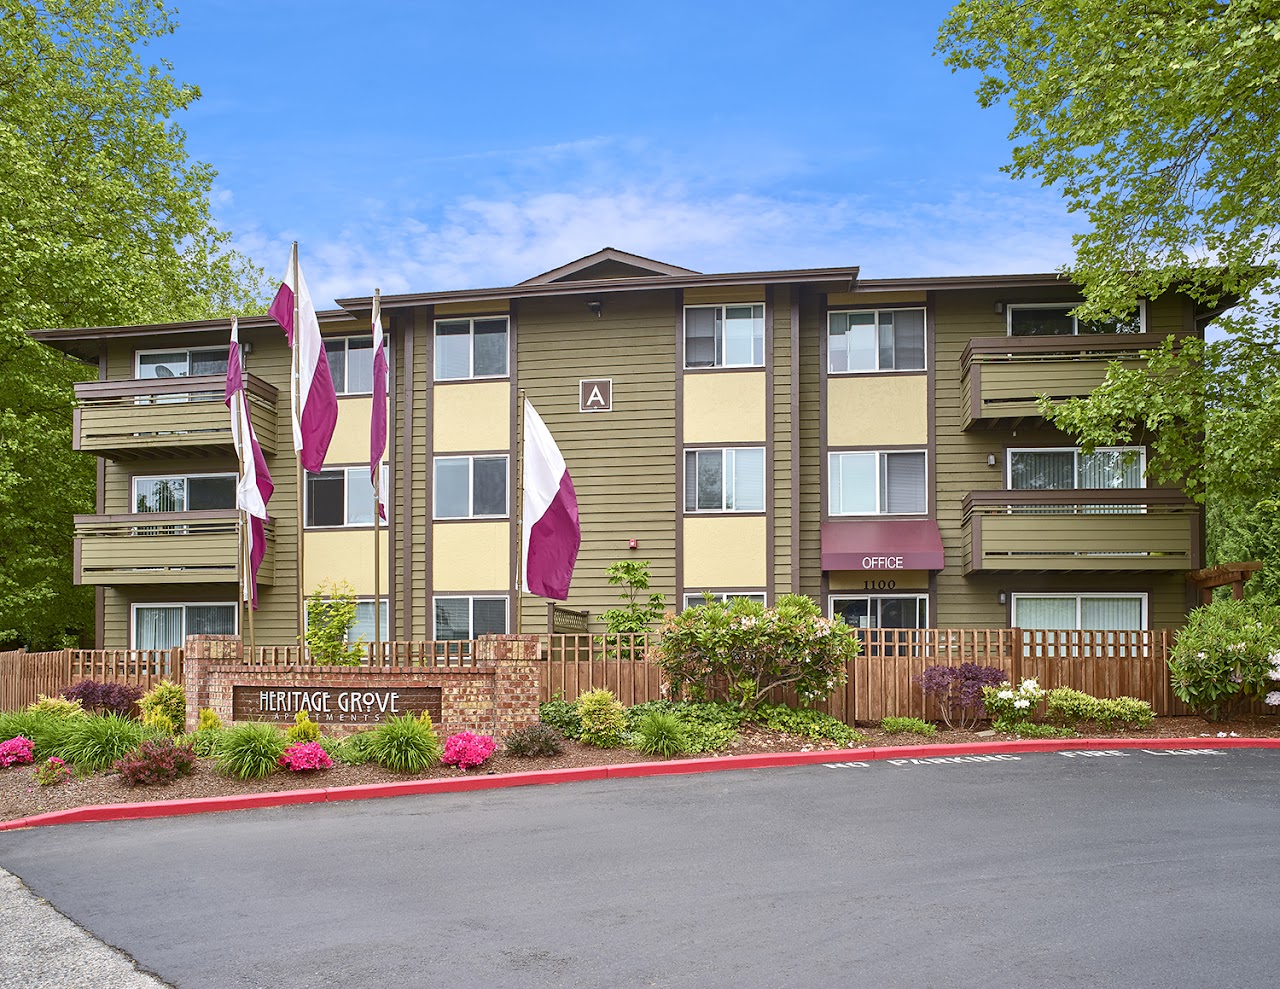 Photo of HERITAGE GROVE APARTMENTS. Affordable housing located at 1100 SUNSET BLVD NE RENTON, WA 98056